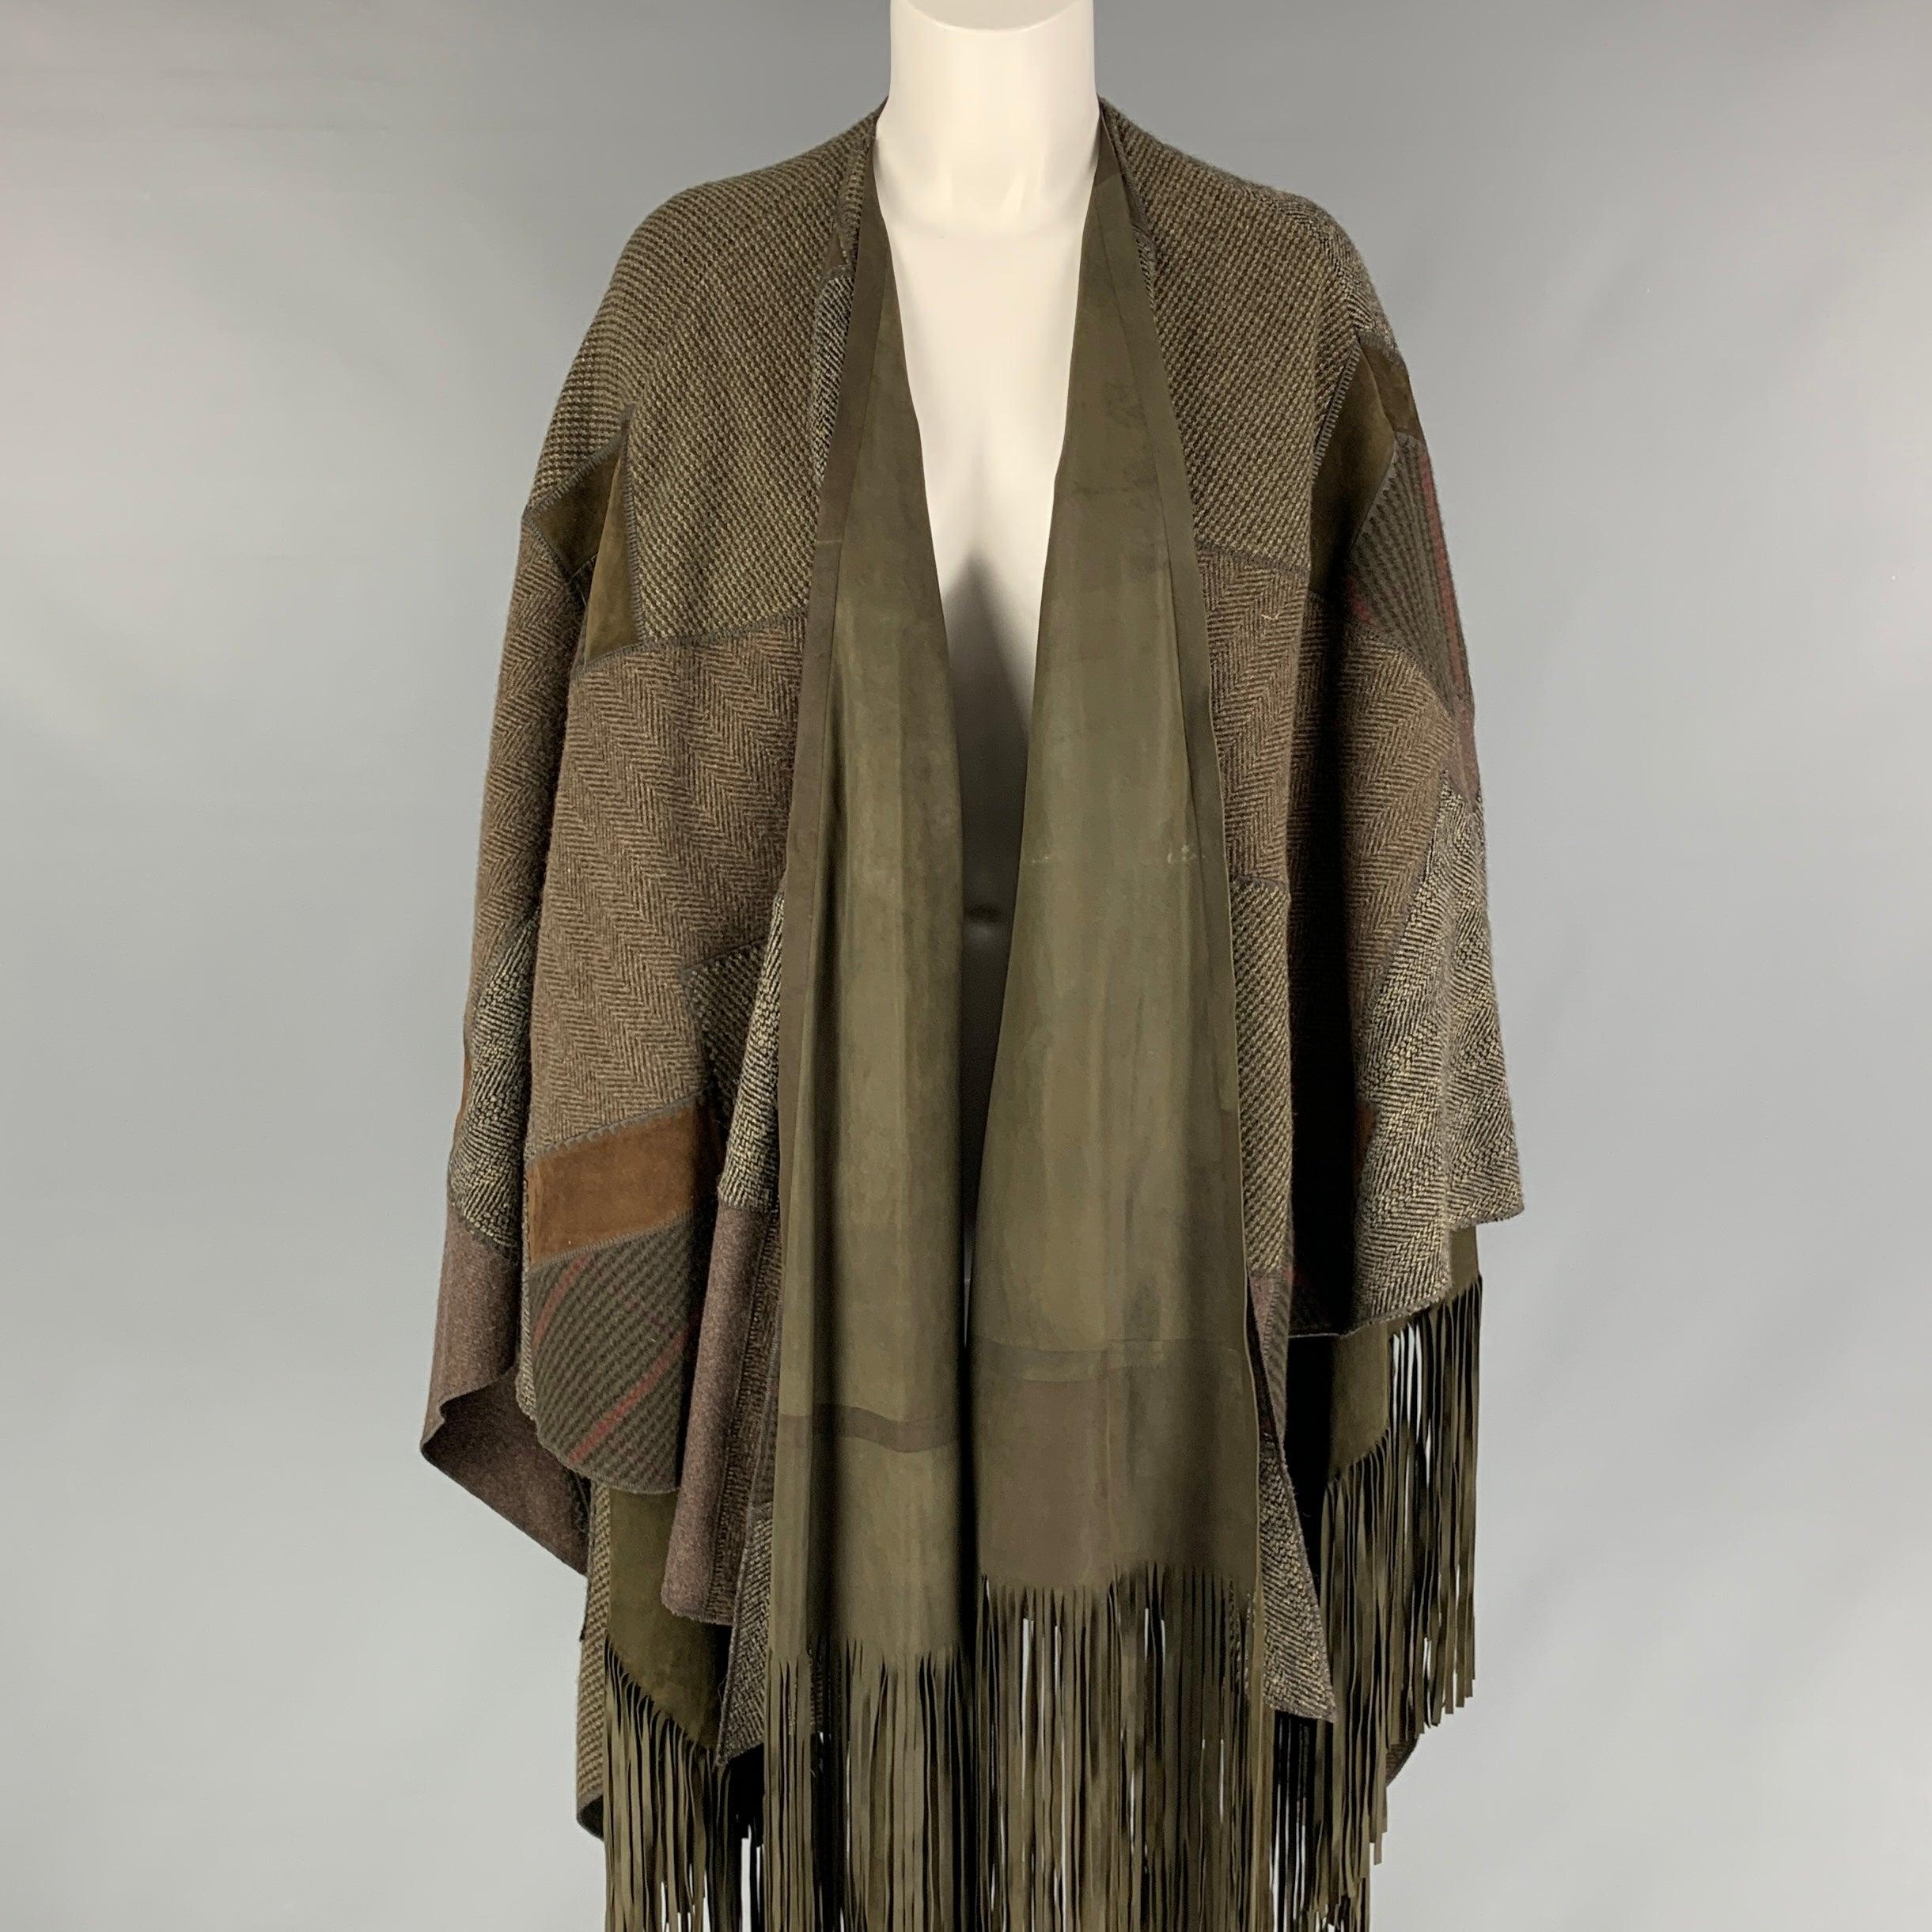 RALPH LAUREN 2016 Collection 'Carlotta' poncho comes in a olive & brown wool featuring patchwork designs, suede fringe trim, and a open front.
Excellent
Pre-Owned Condition. 

Marked:   XS/S 

Measurements: 
  Length: 42 inches 
  
  
 
Reference: